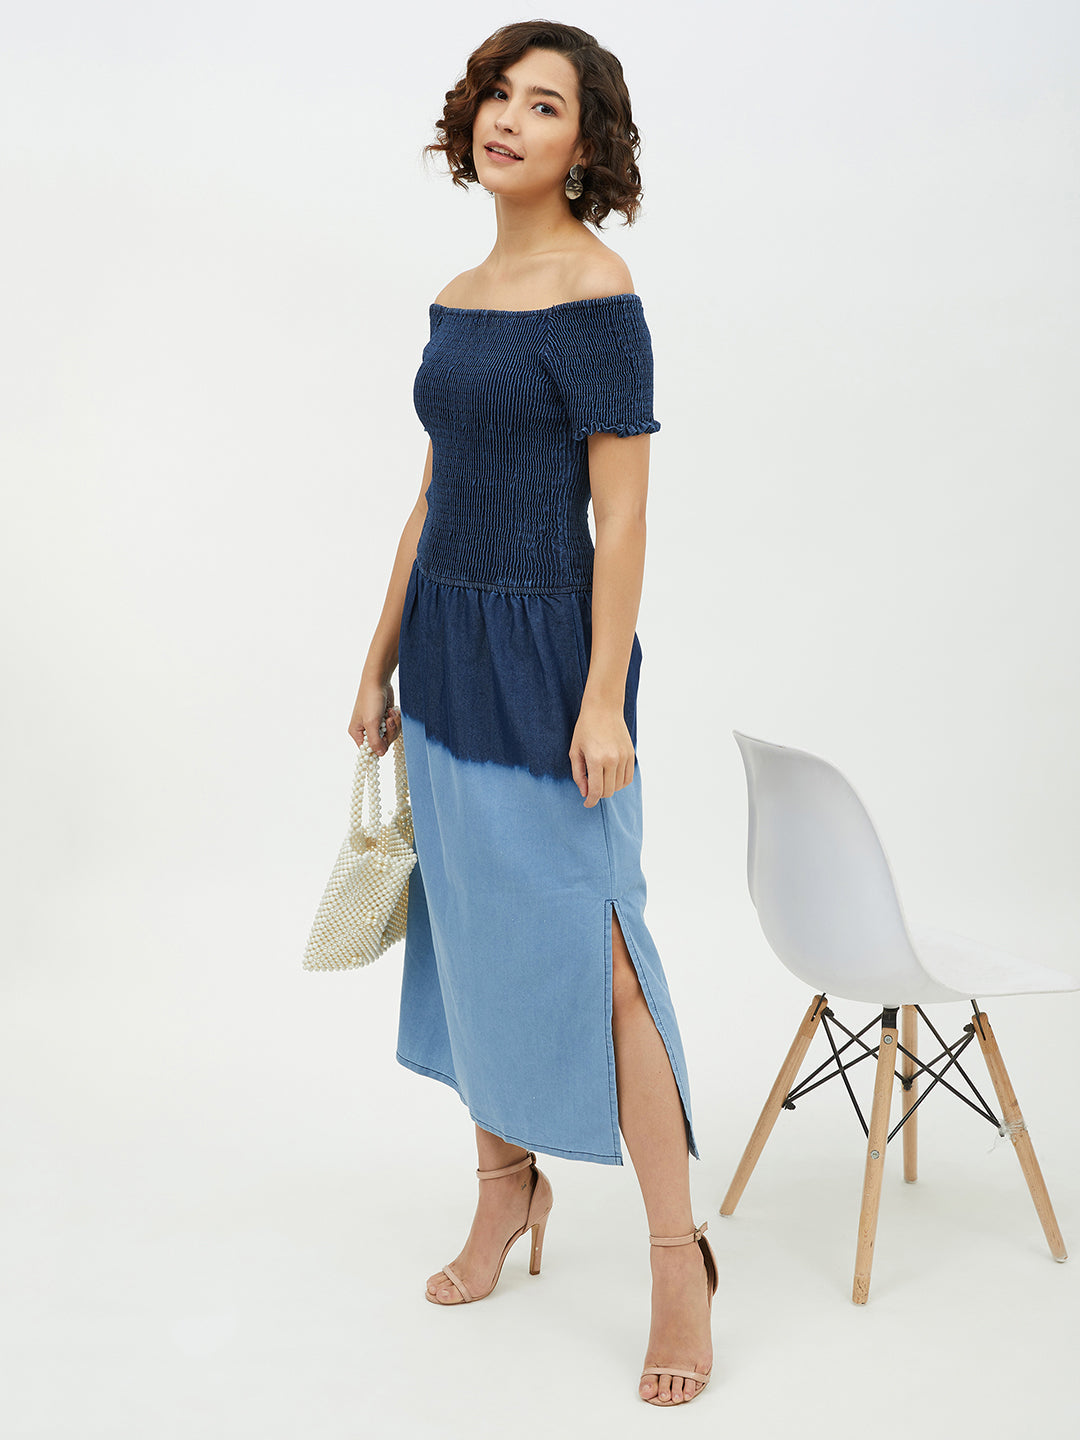 Women's Denim Smocking Dress with Ombre effect